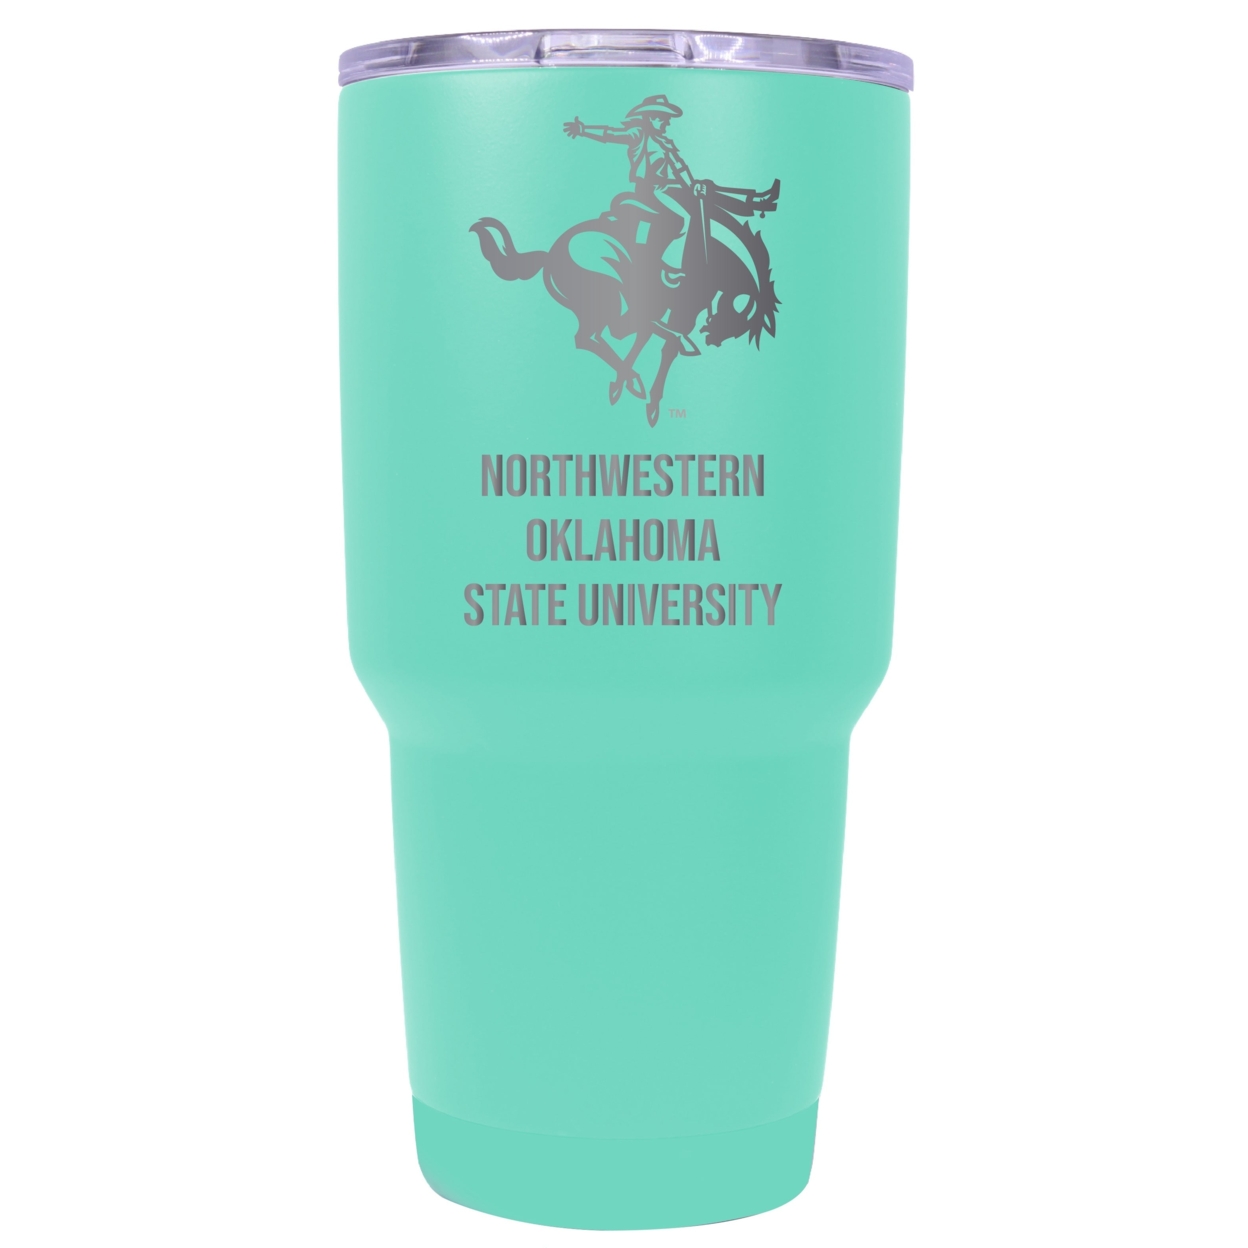 Northwestern Oklahoma State University 24 Oz Laser Engraved Stainless Steel Insulated Tumbler - Choose Your Color. - Coral